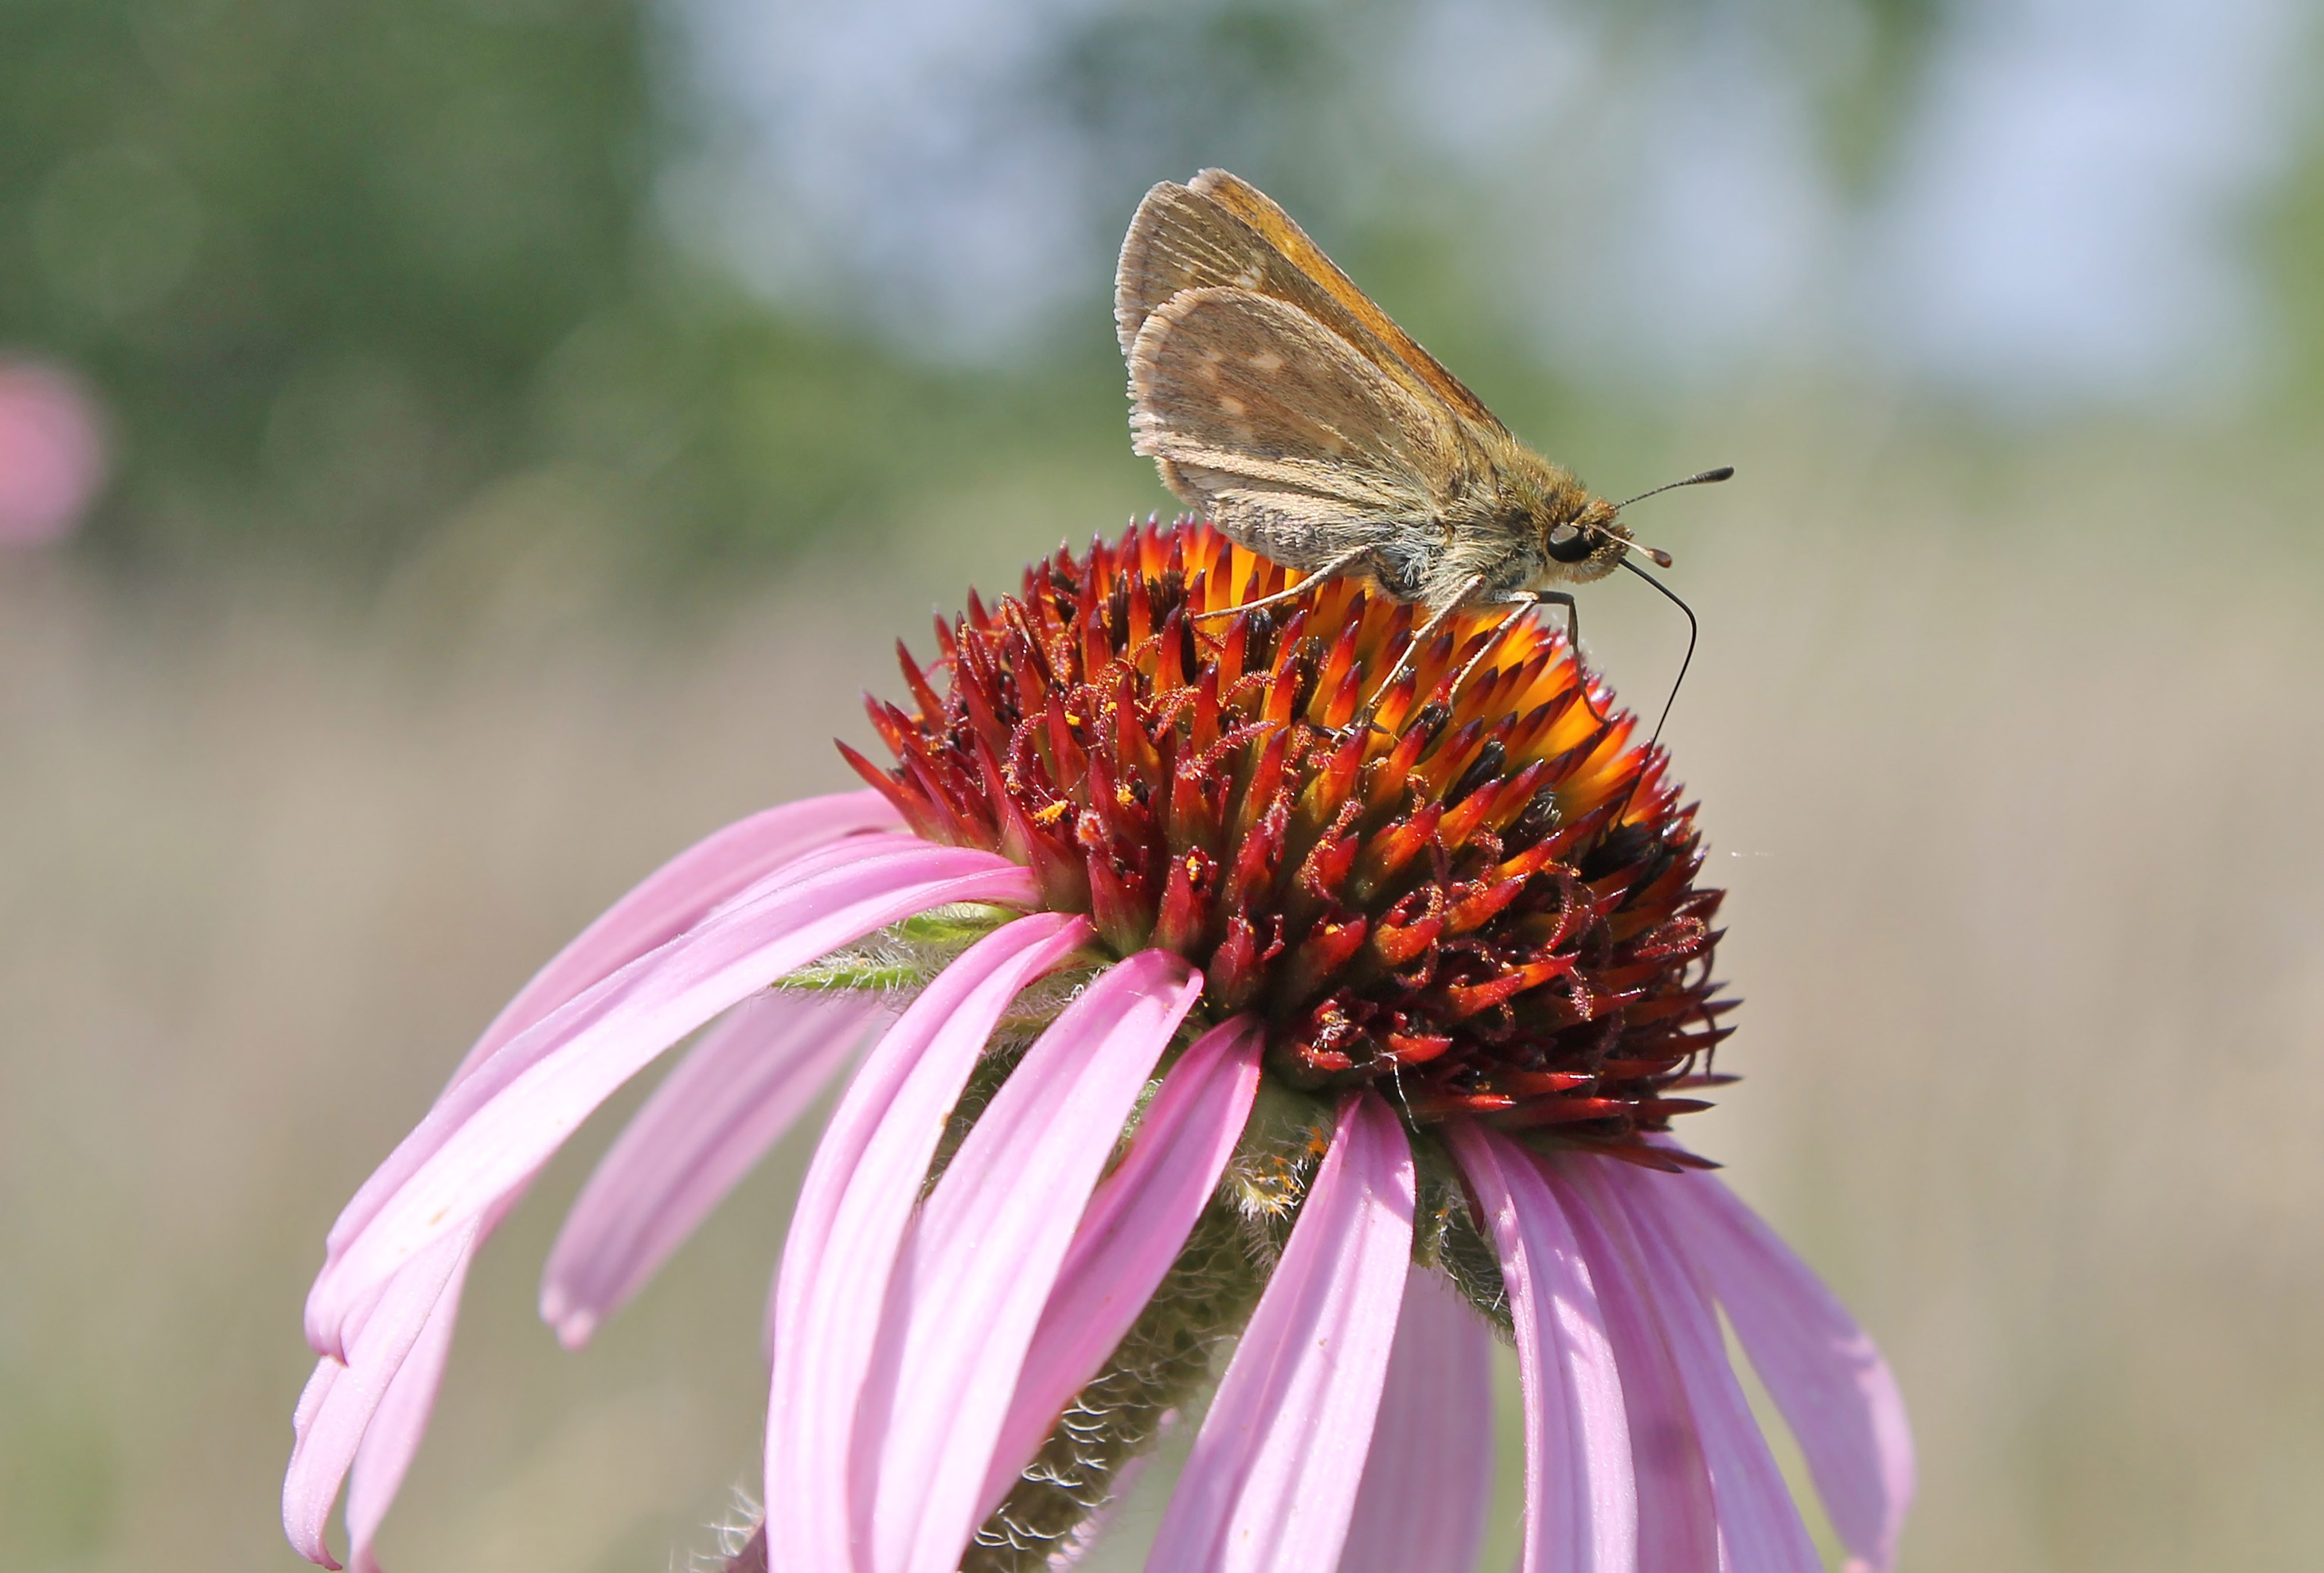 A small gray butterfly, the Dakota skipper, sits on the spiky orange center of a flower with long, thin, pink petals.